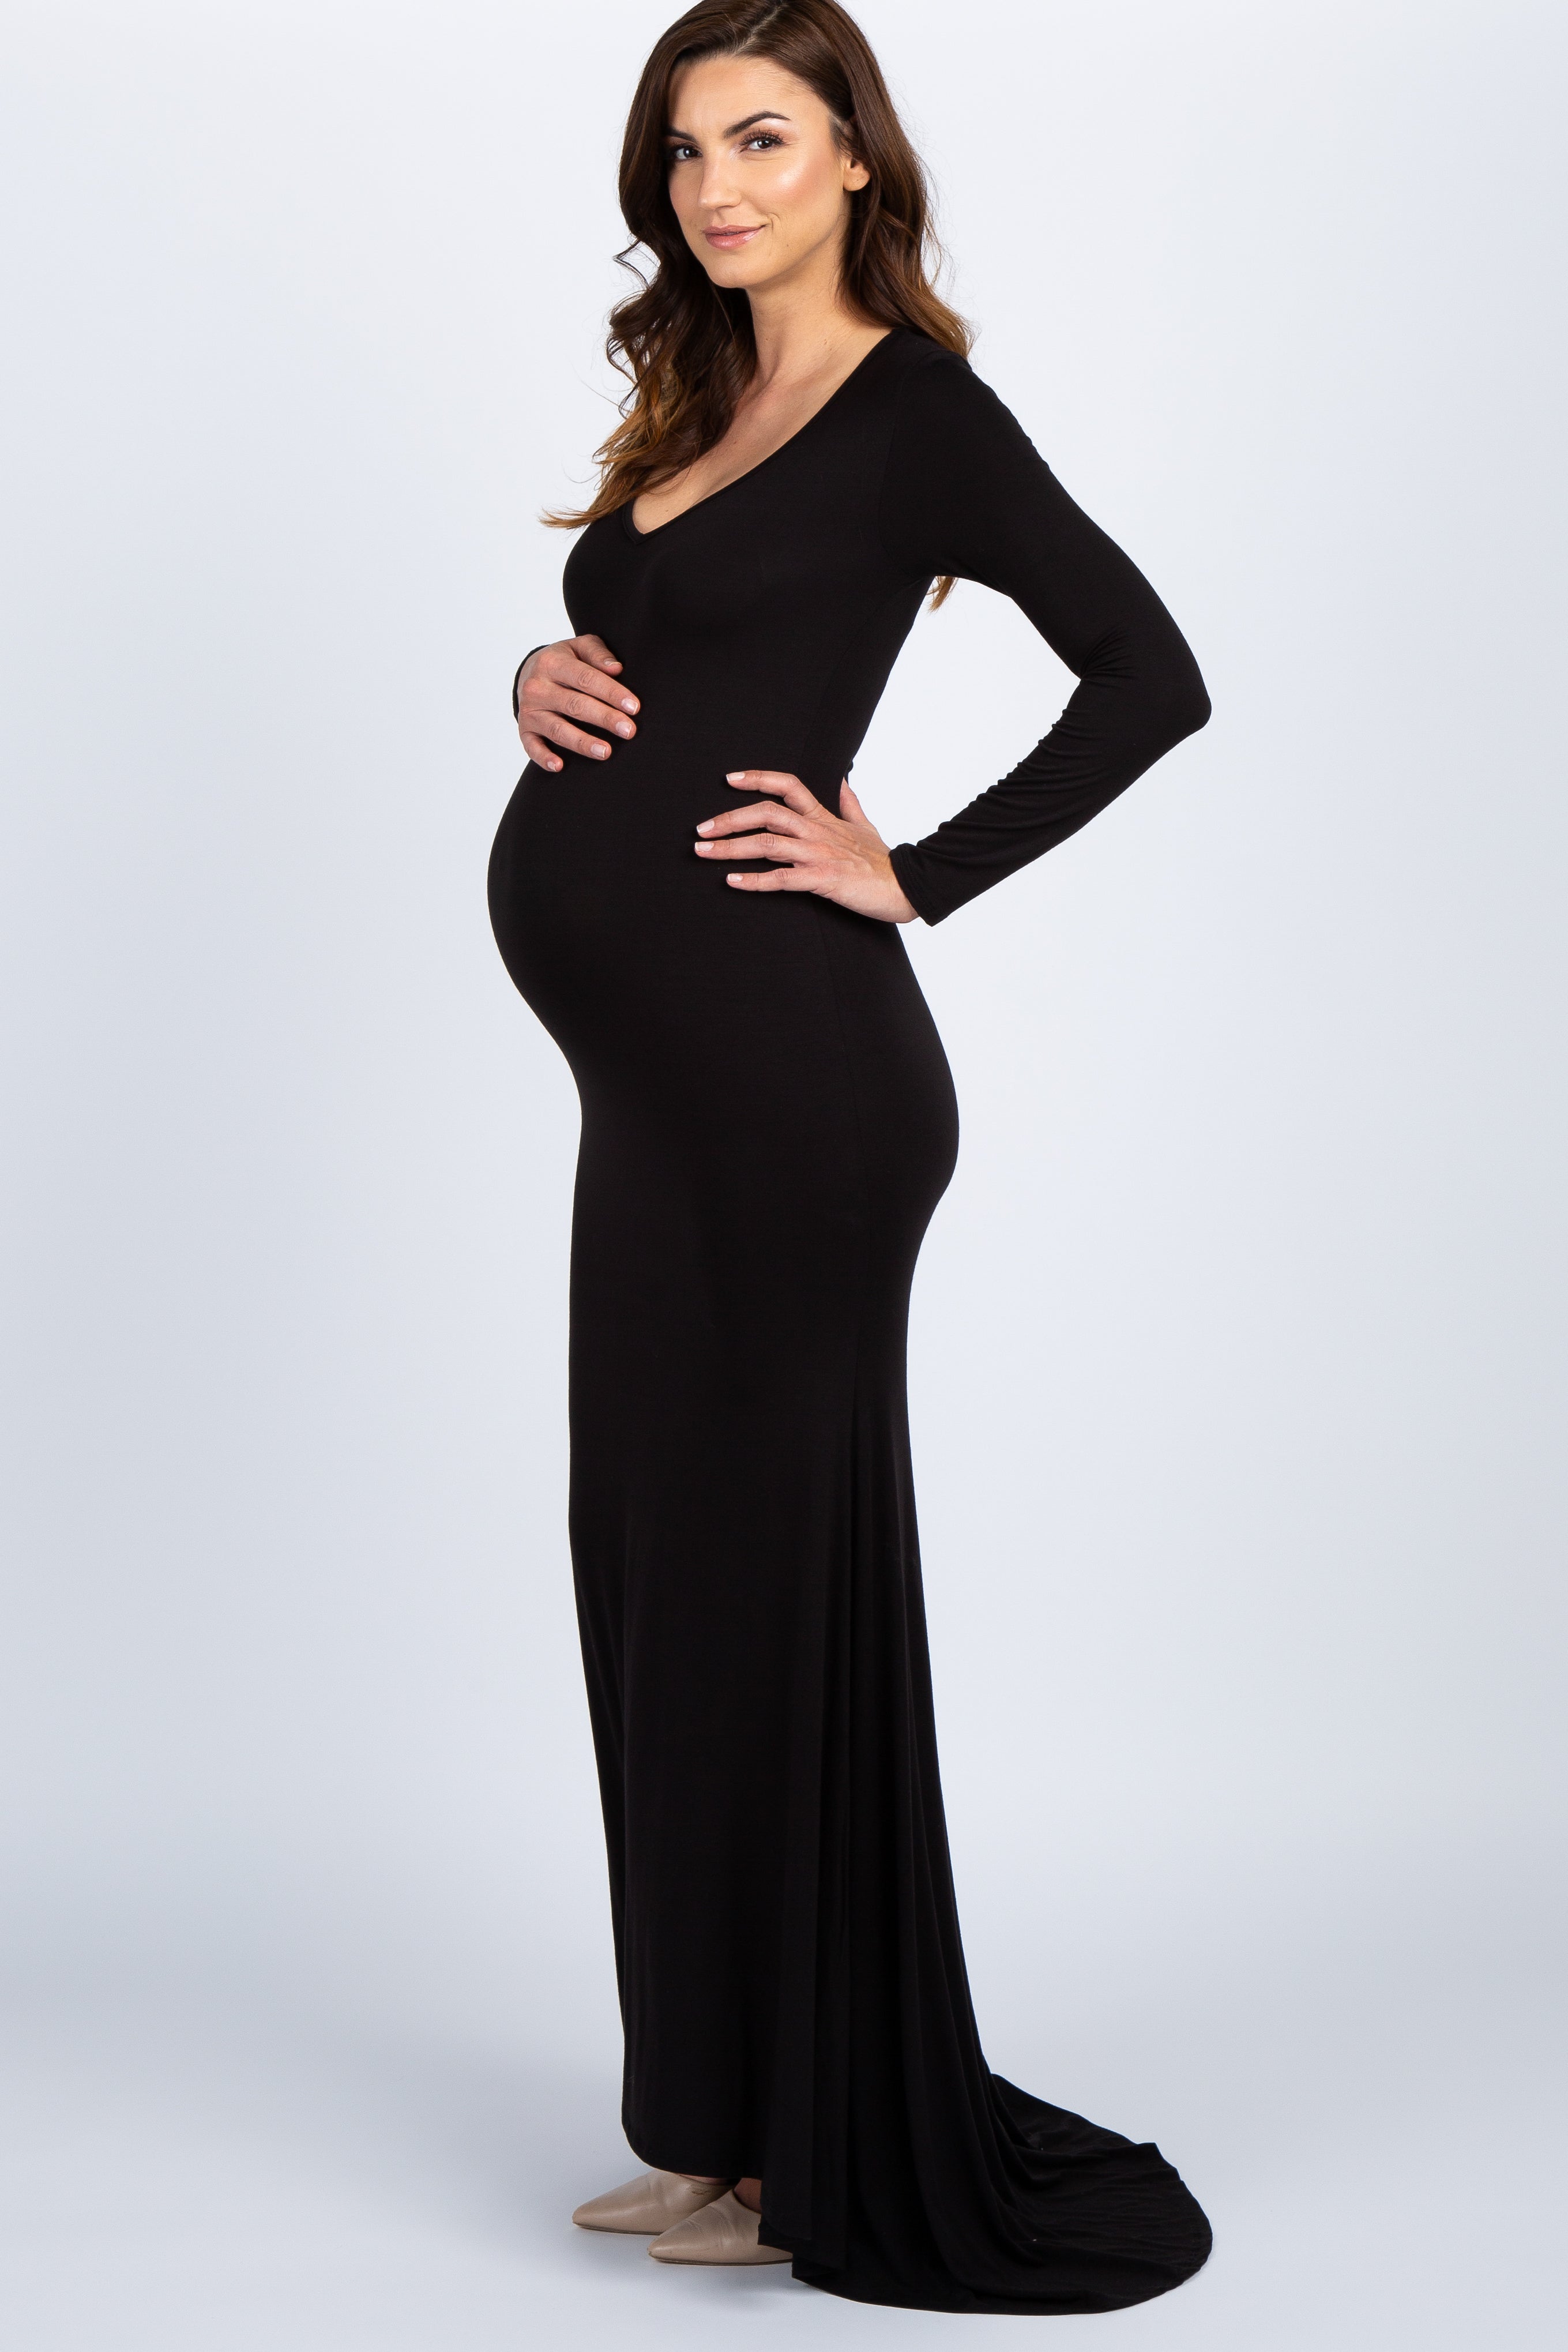 Stunning Maternity Dresses or Tunics- Black, Dusty Pink, and